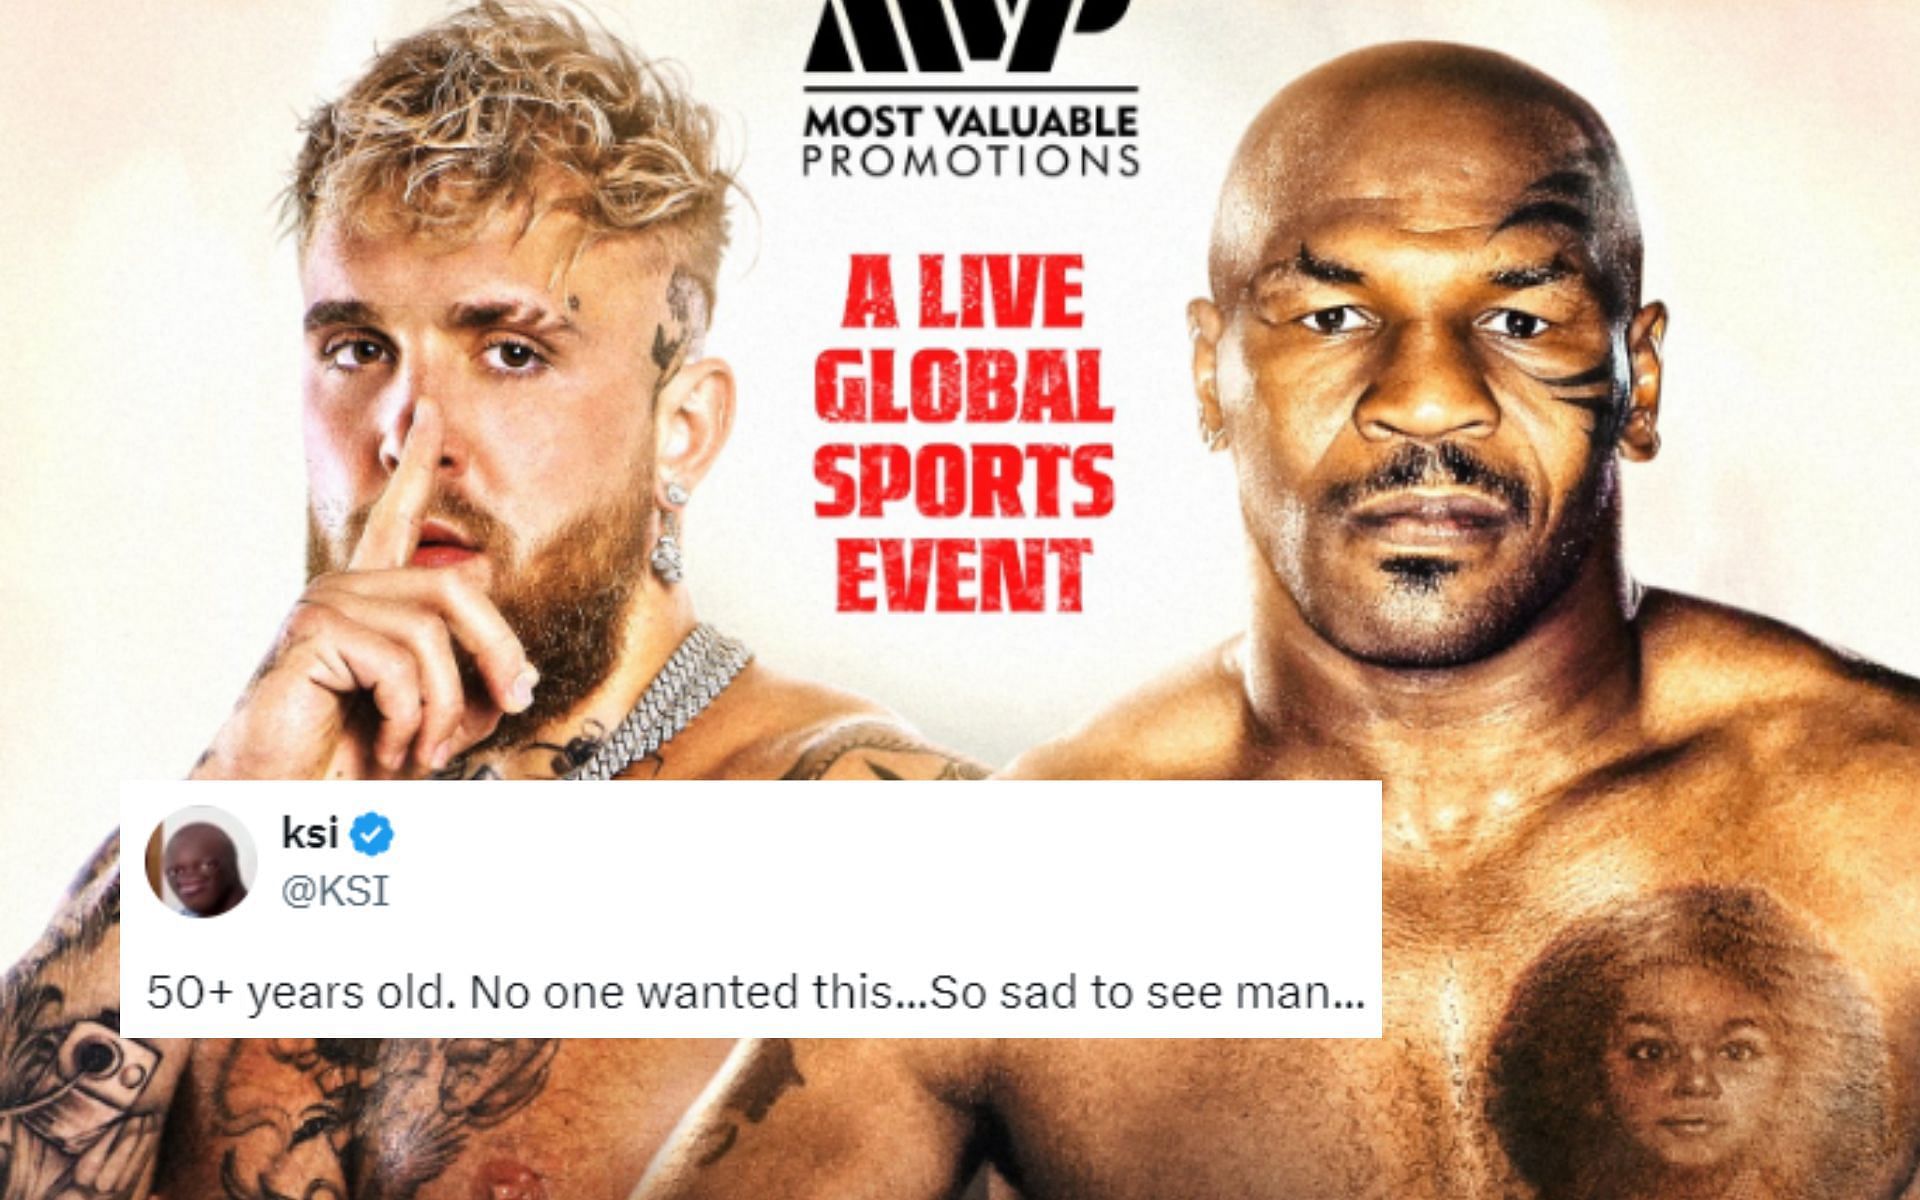 Jake Paul (left) has been an active professional boxer since January 2020, whereas Mike Tyson (right) last competed in a pro boxing match around two decades ago [Image courtesy: @jakepaul on X]